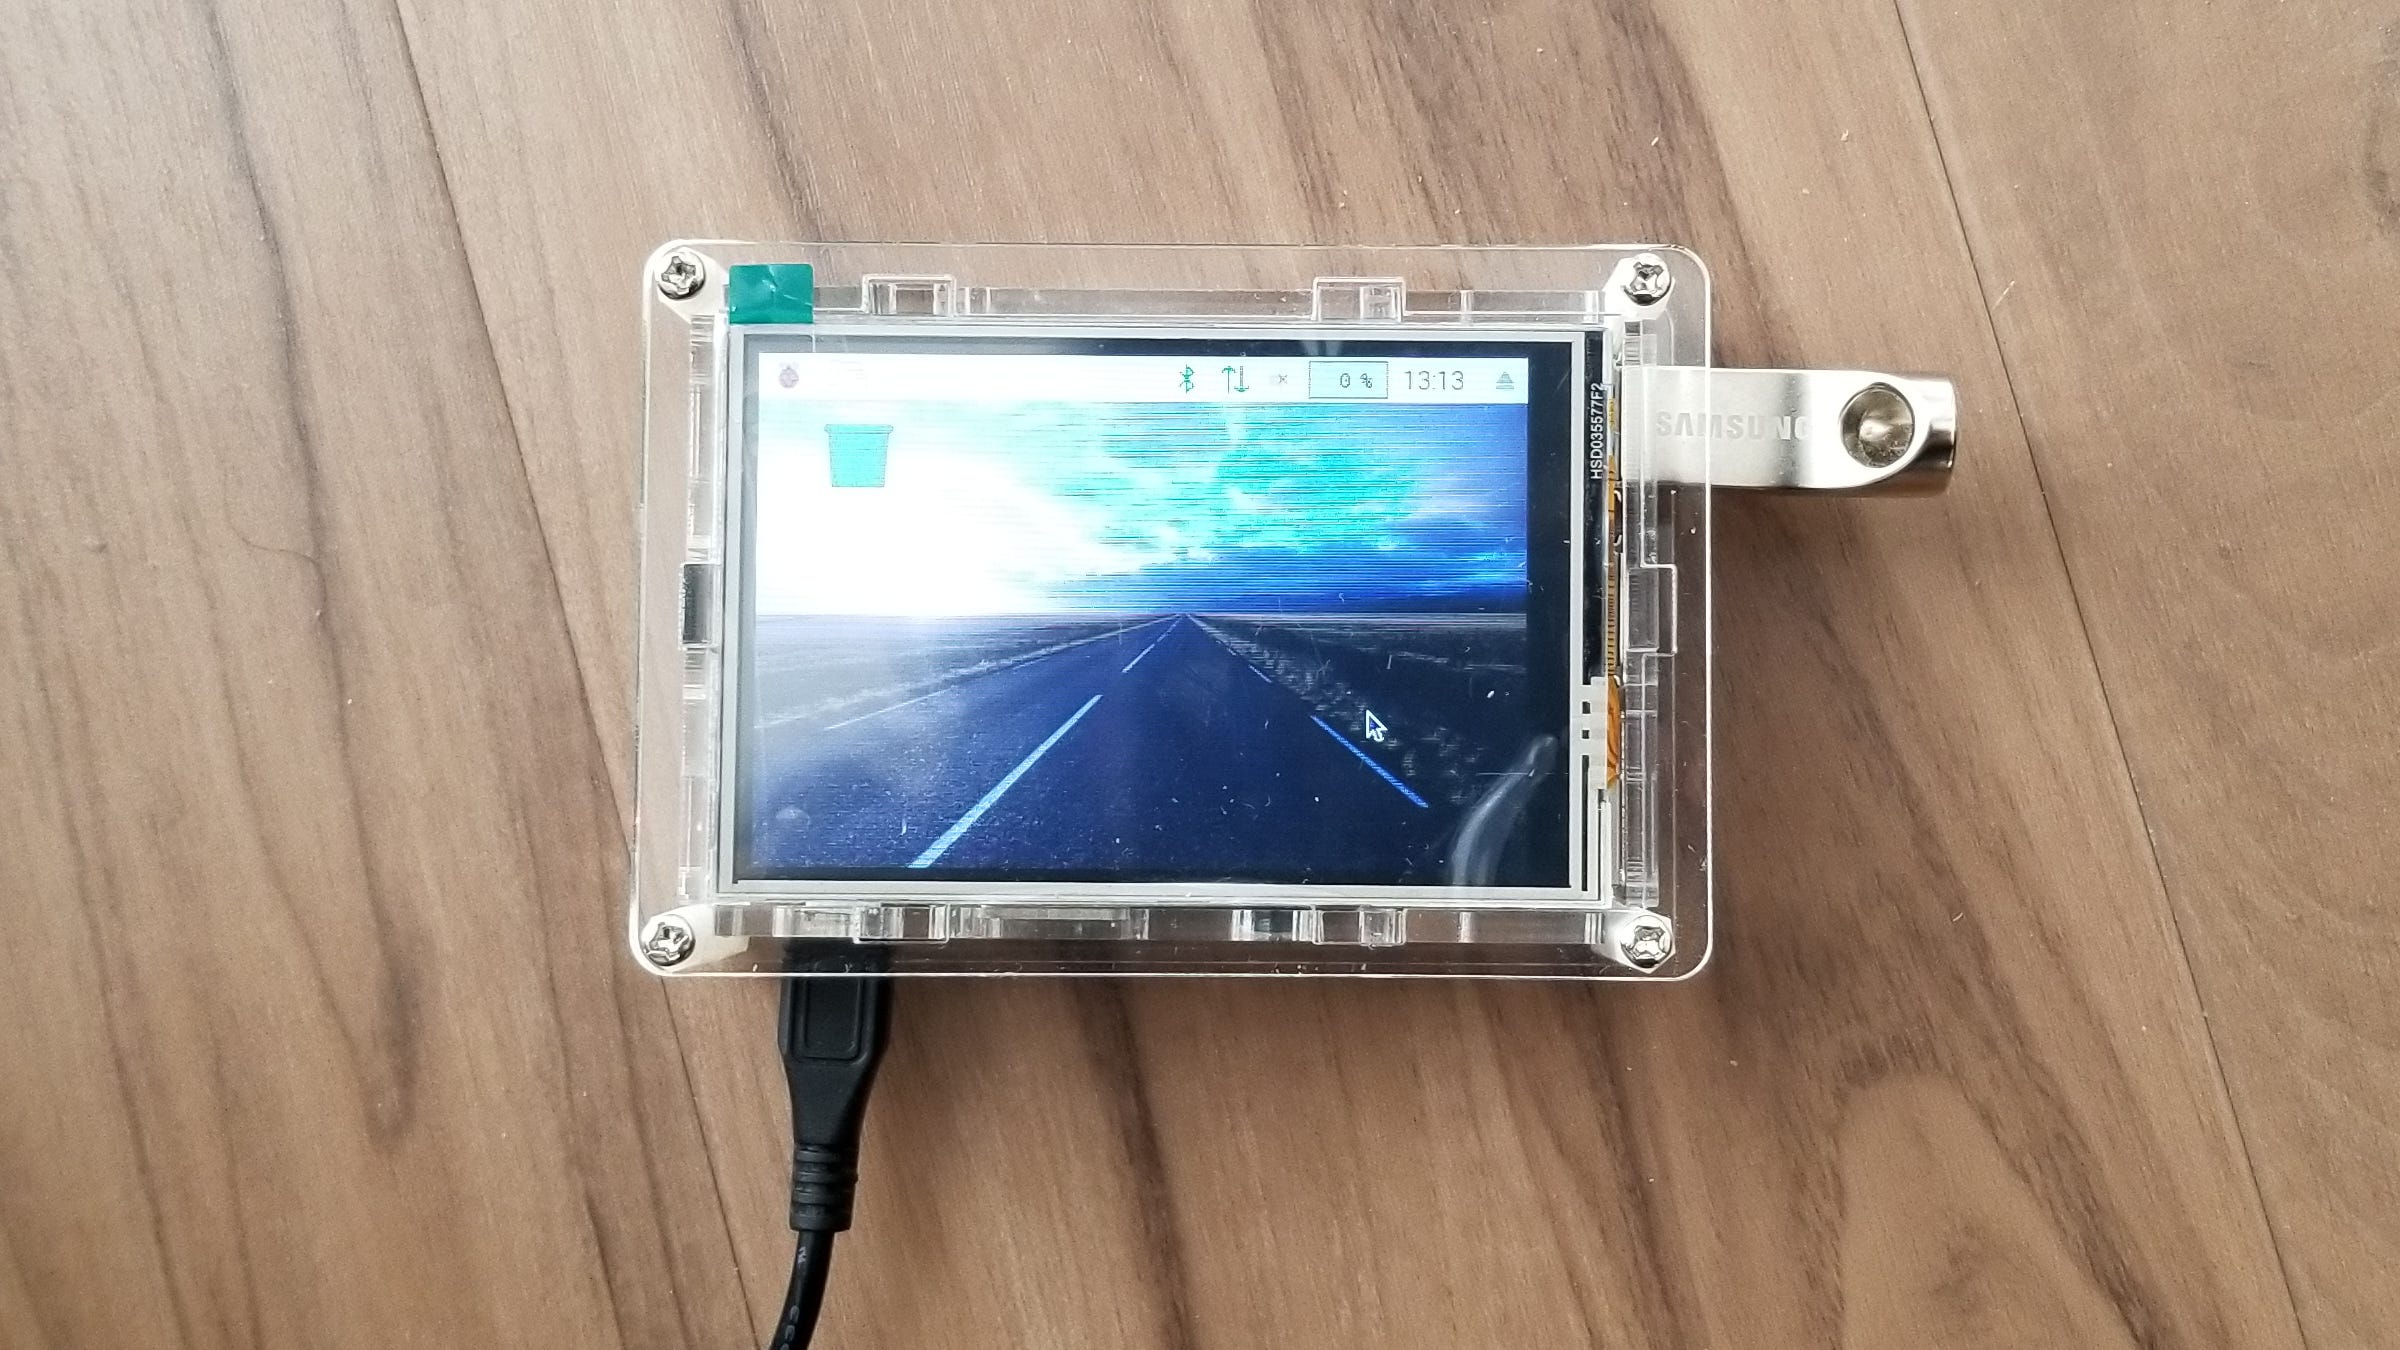 Setting up an LCD screen on the Raspberry Pi, 2019 edition | by Avik Das |  Medium